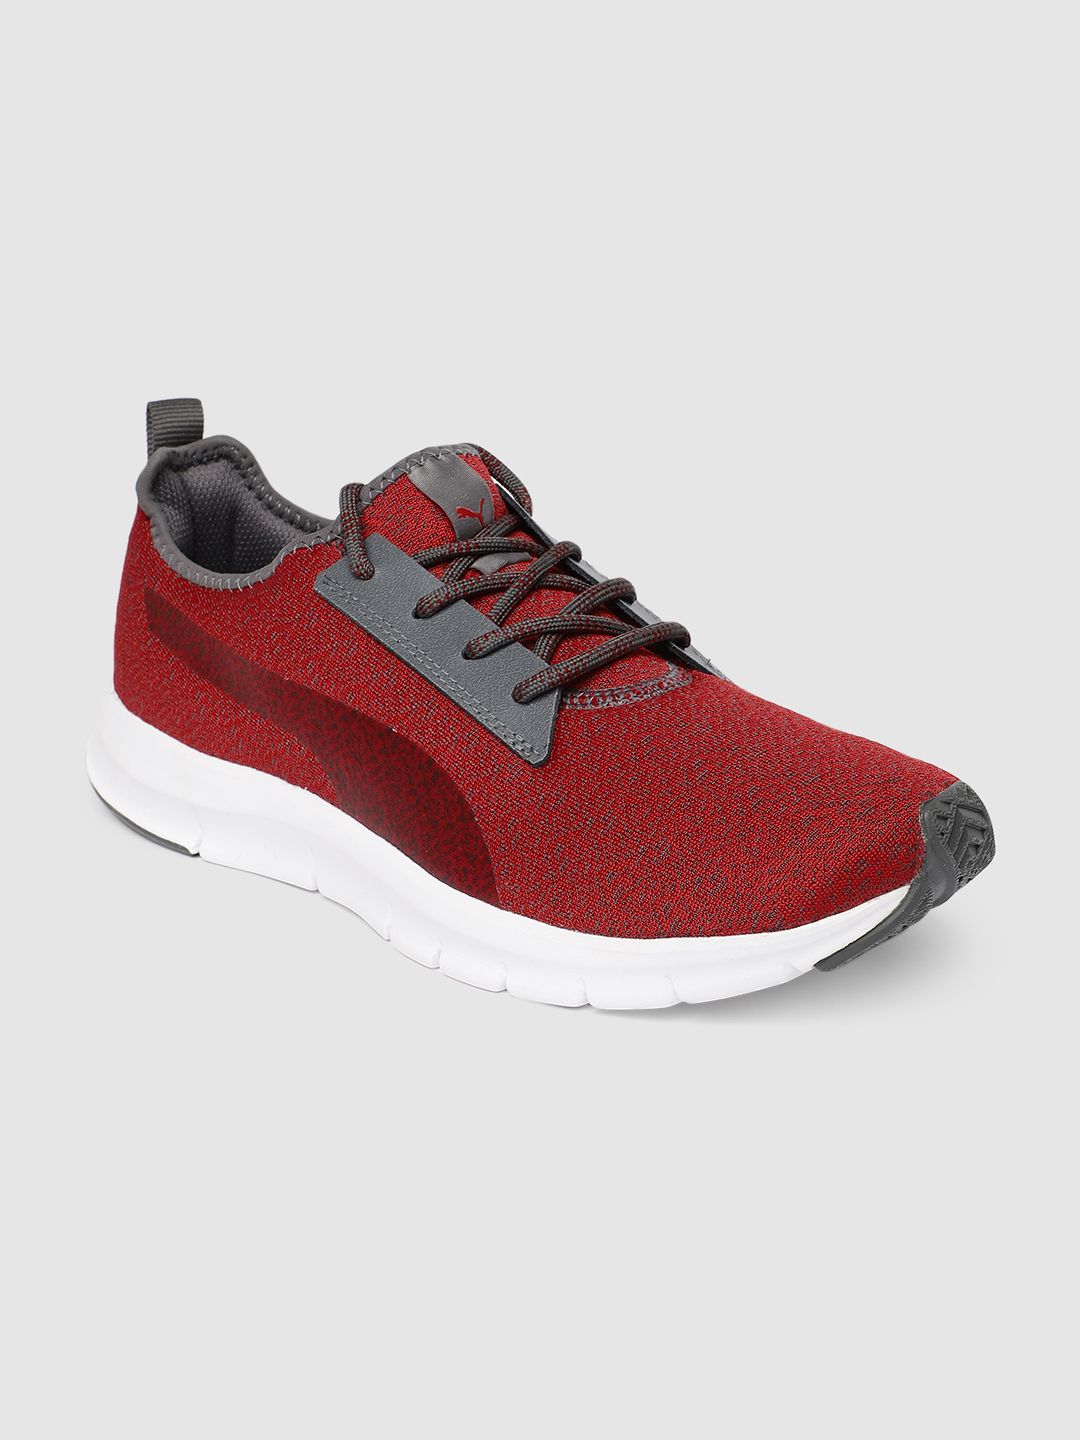 Puma Unisex Red Flexracer HM Sneakers Price in India